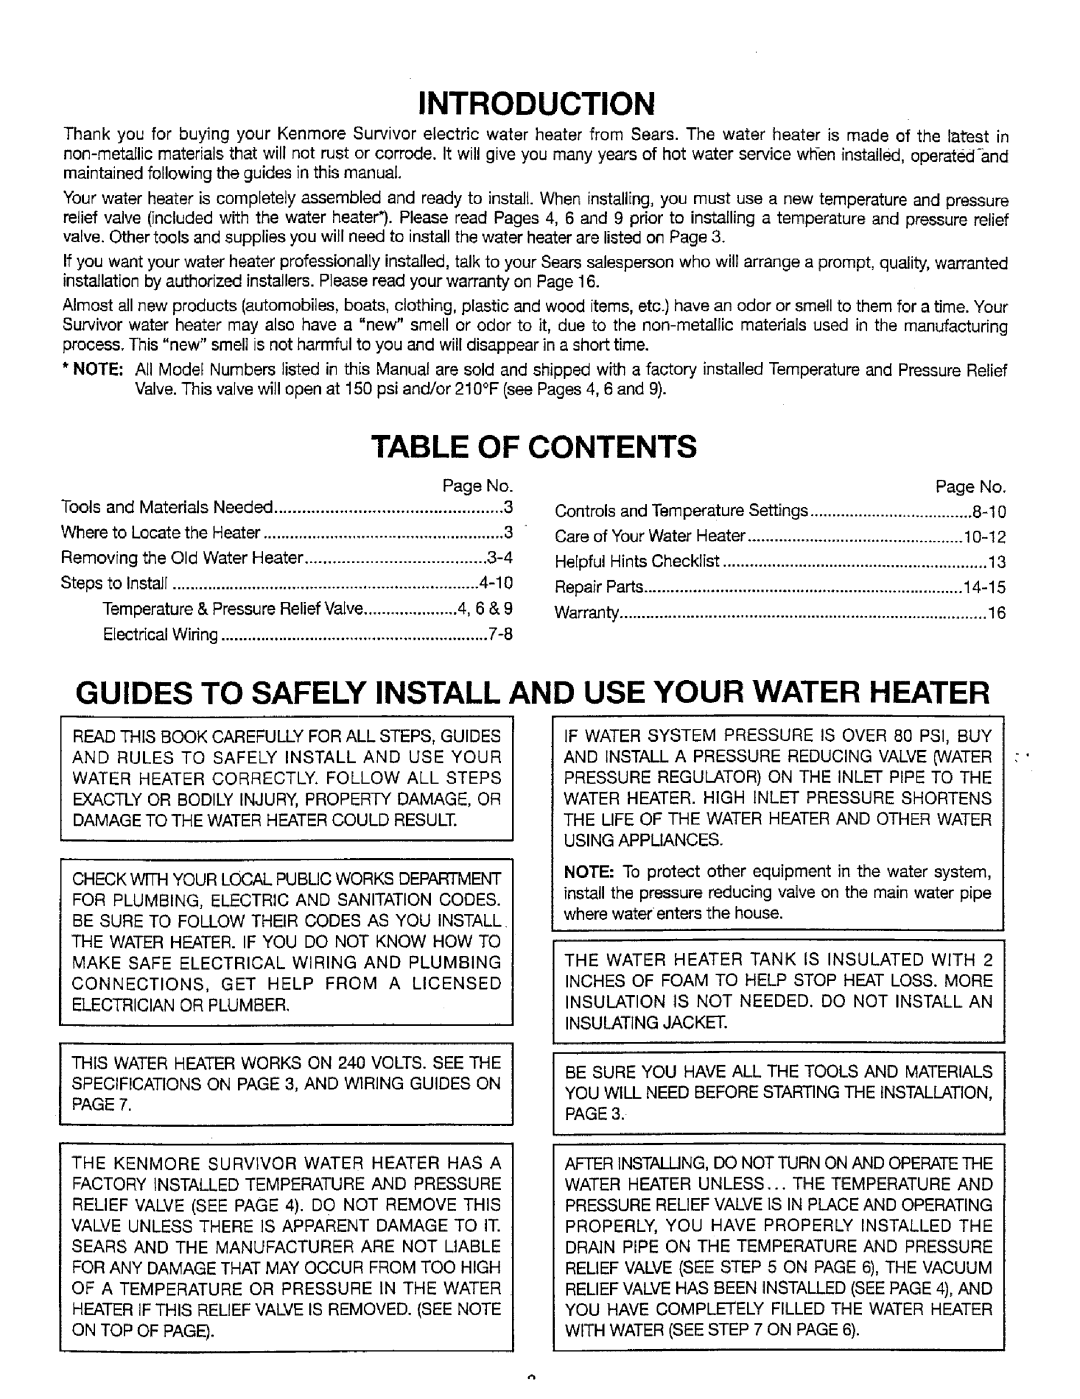 Sears 449.32031, 449.320411 Introduction, Table Of Contents, Guides To Safely Install And Use Your Water Heater, Page No 